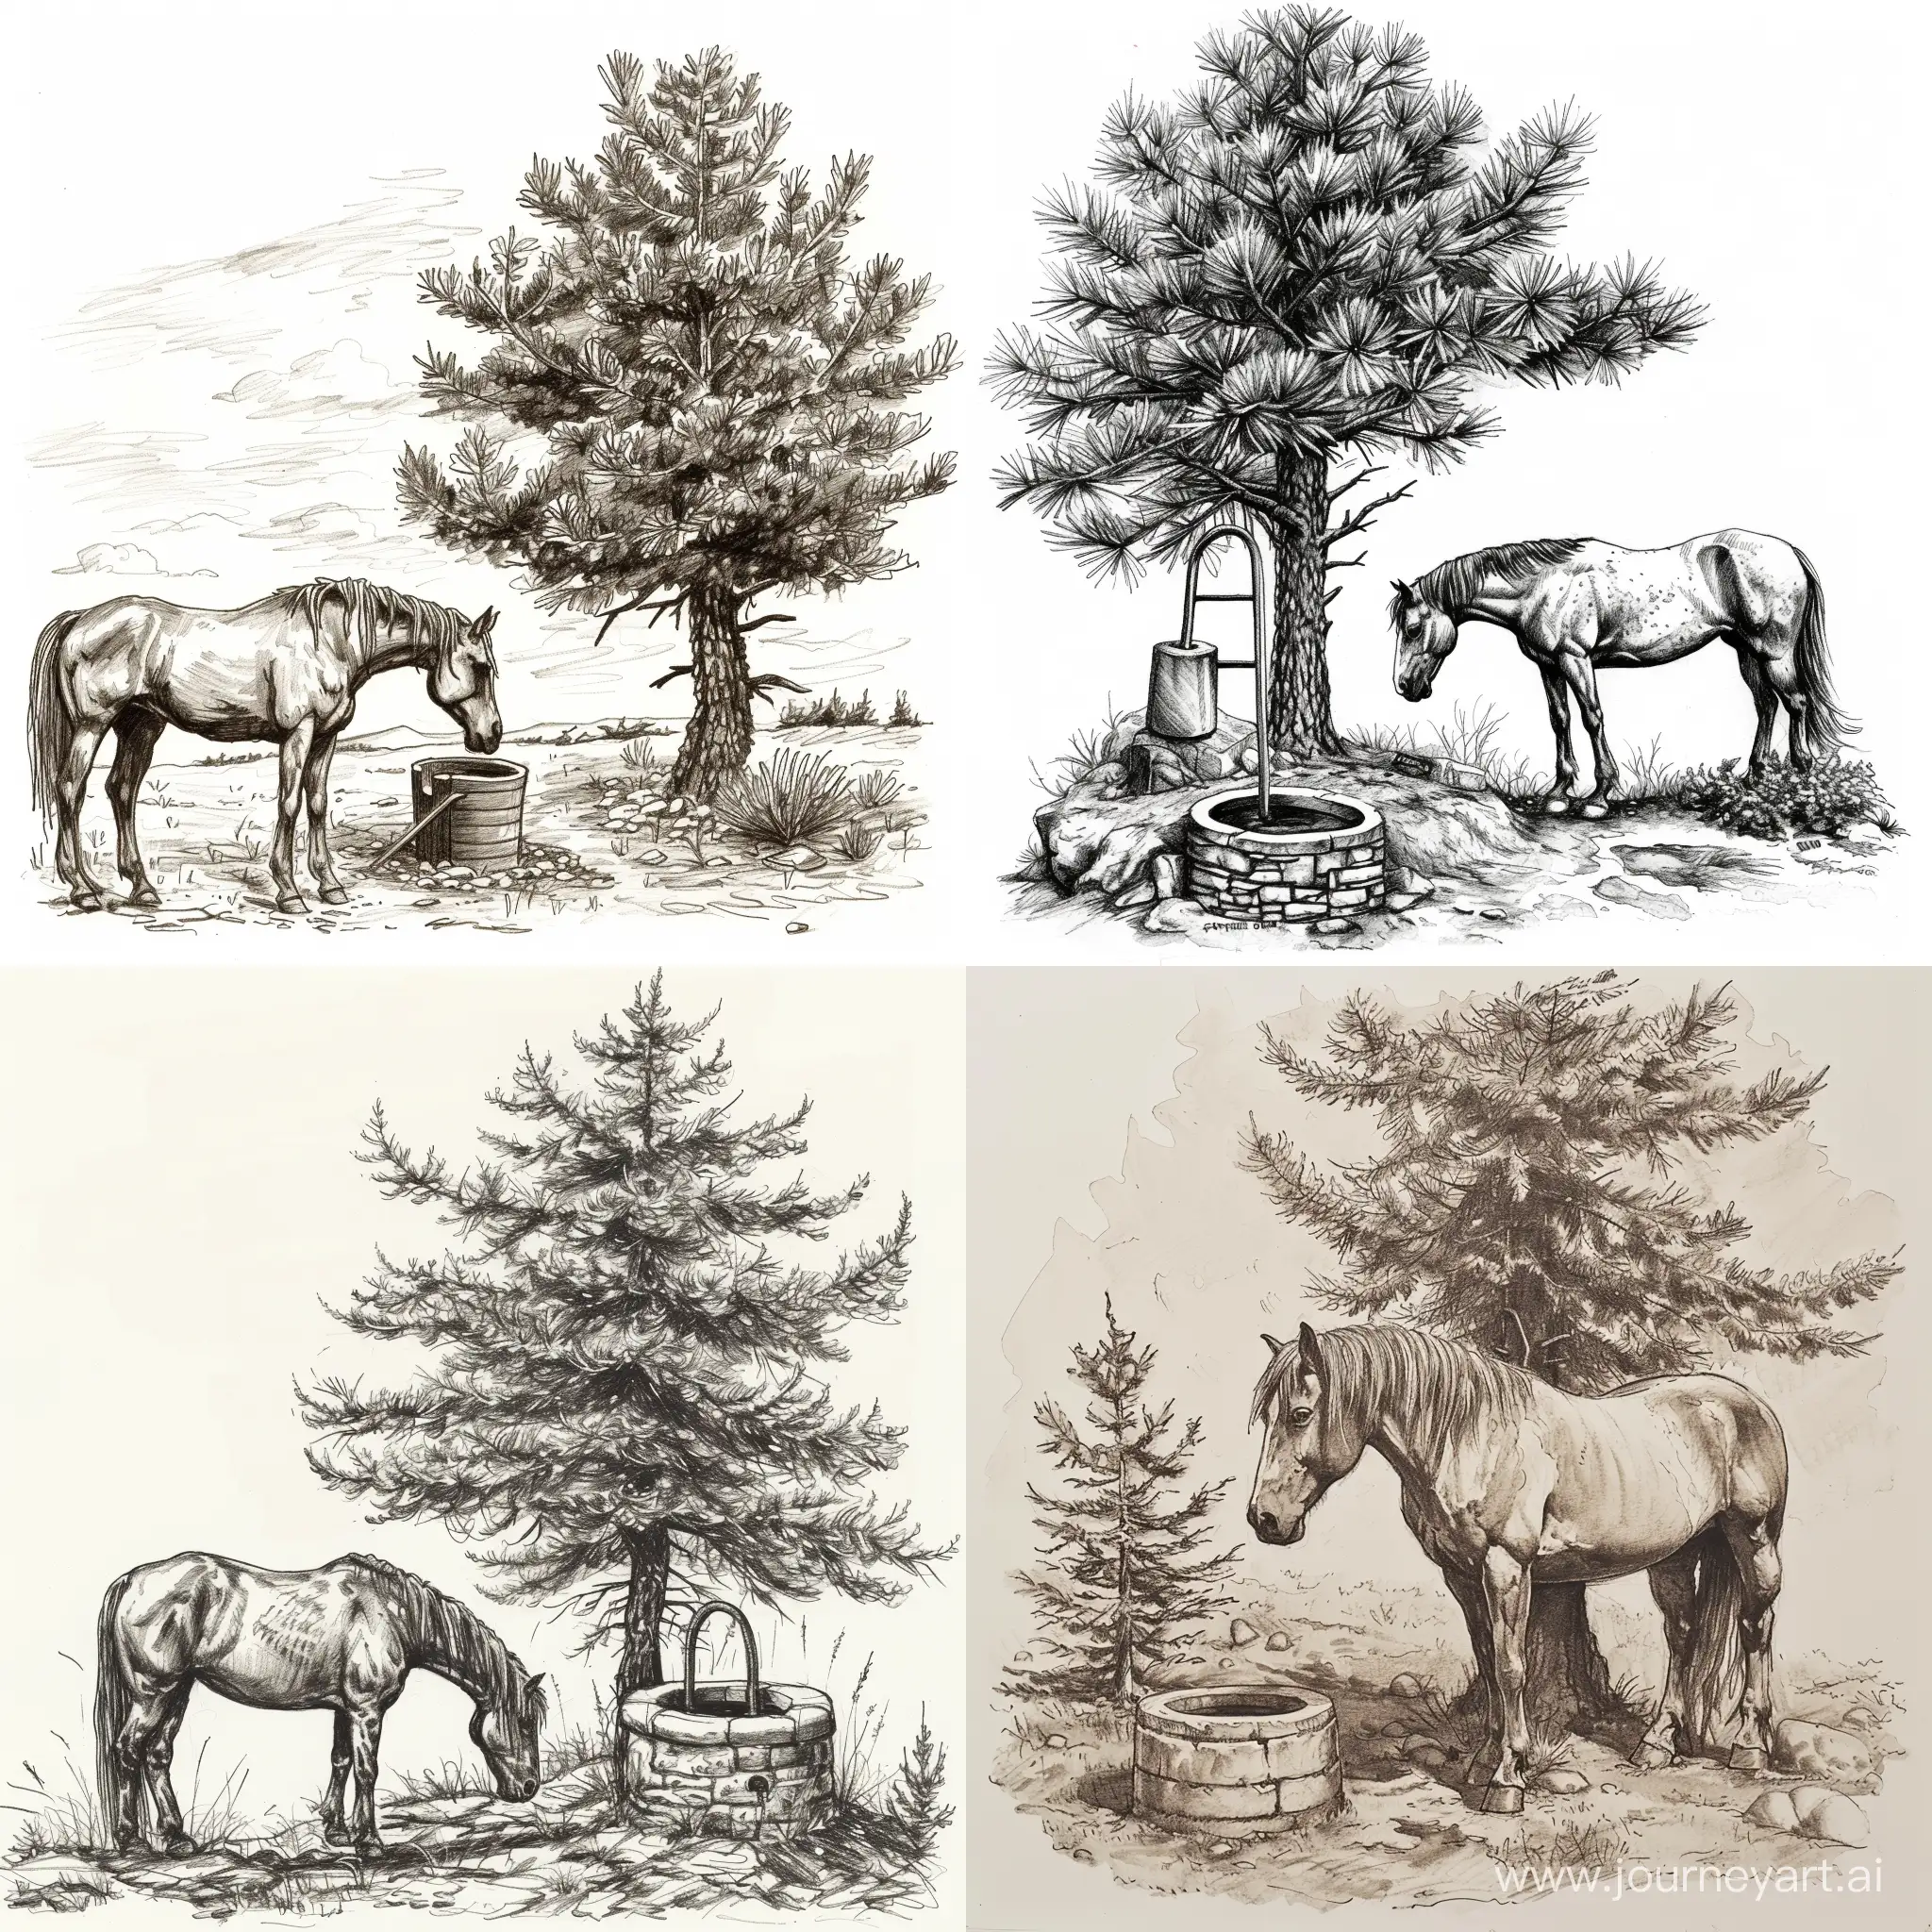 Rustic-Sketch-of-an-Old-Horse-by-a-Pine-Tree-and-Well